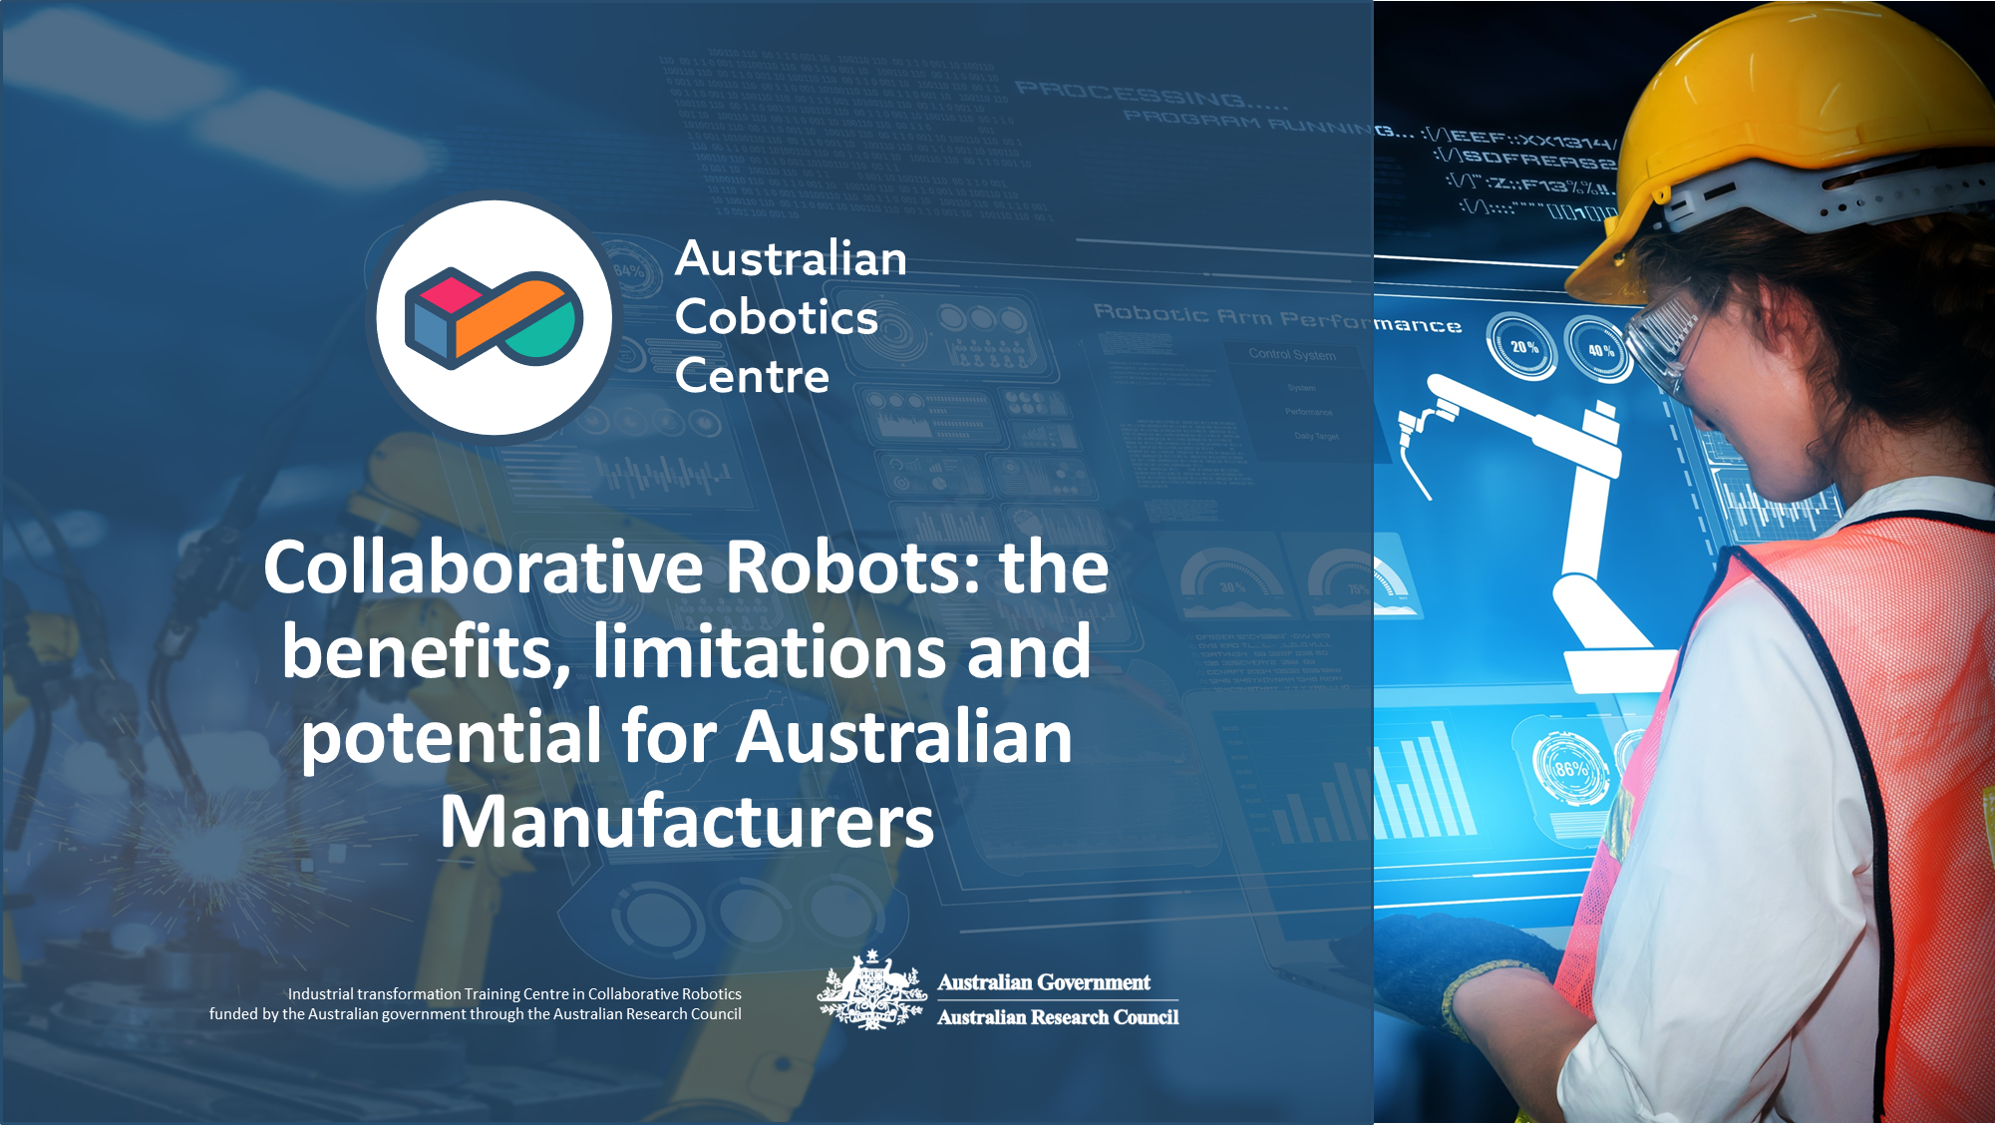 Collaborative Robots: the benefits, limitations and potential for Australian Manufacturers